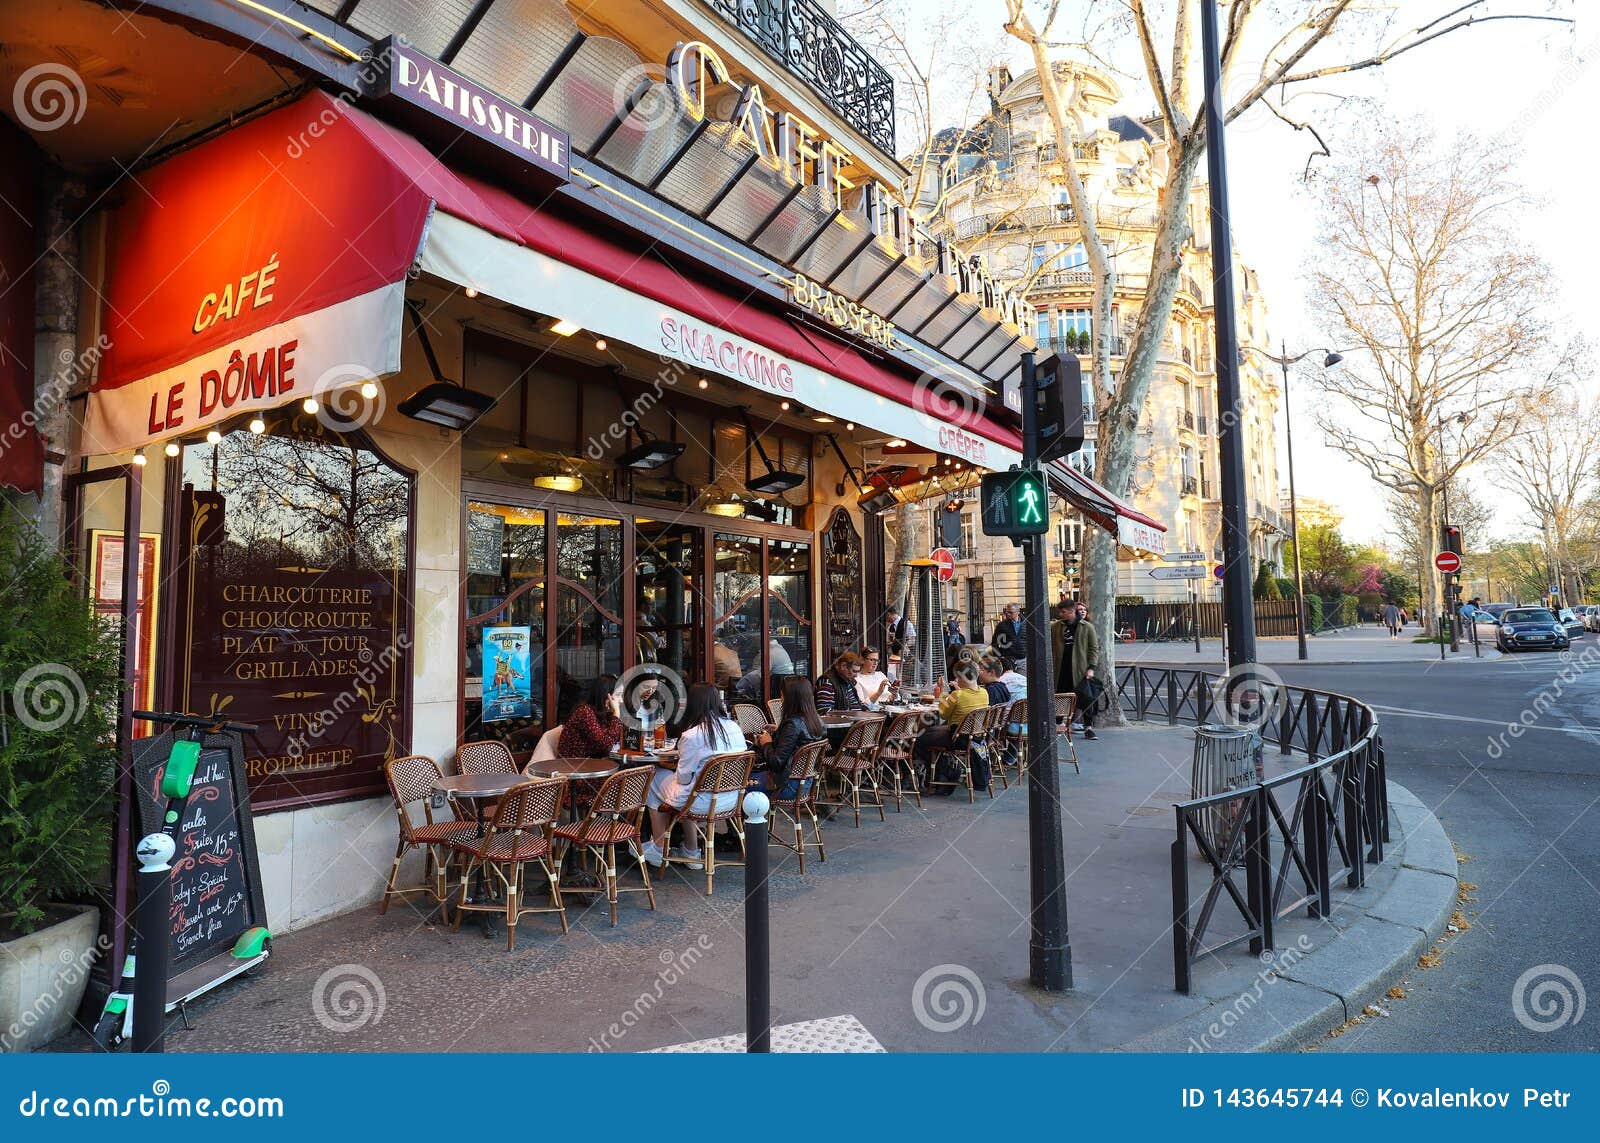 Cafe Le Dome Is Traditonal French Cafe Located Near The ...